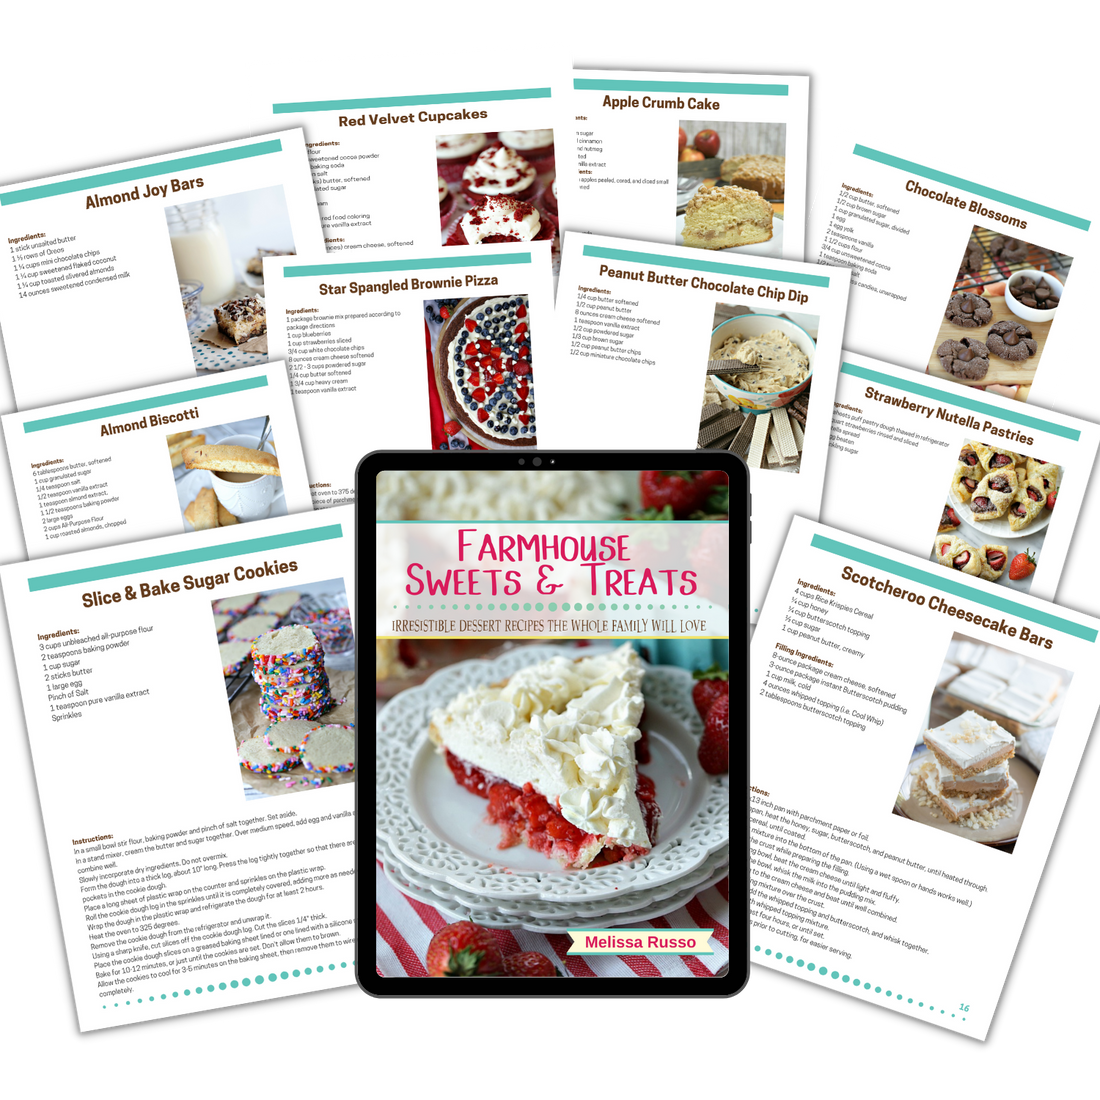 The Farmhouse Sweets &amp; Treats Cookbook by Melissa Russo features irresistible dessert recipes the whole family will love! 